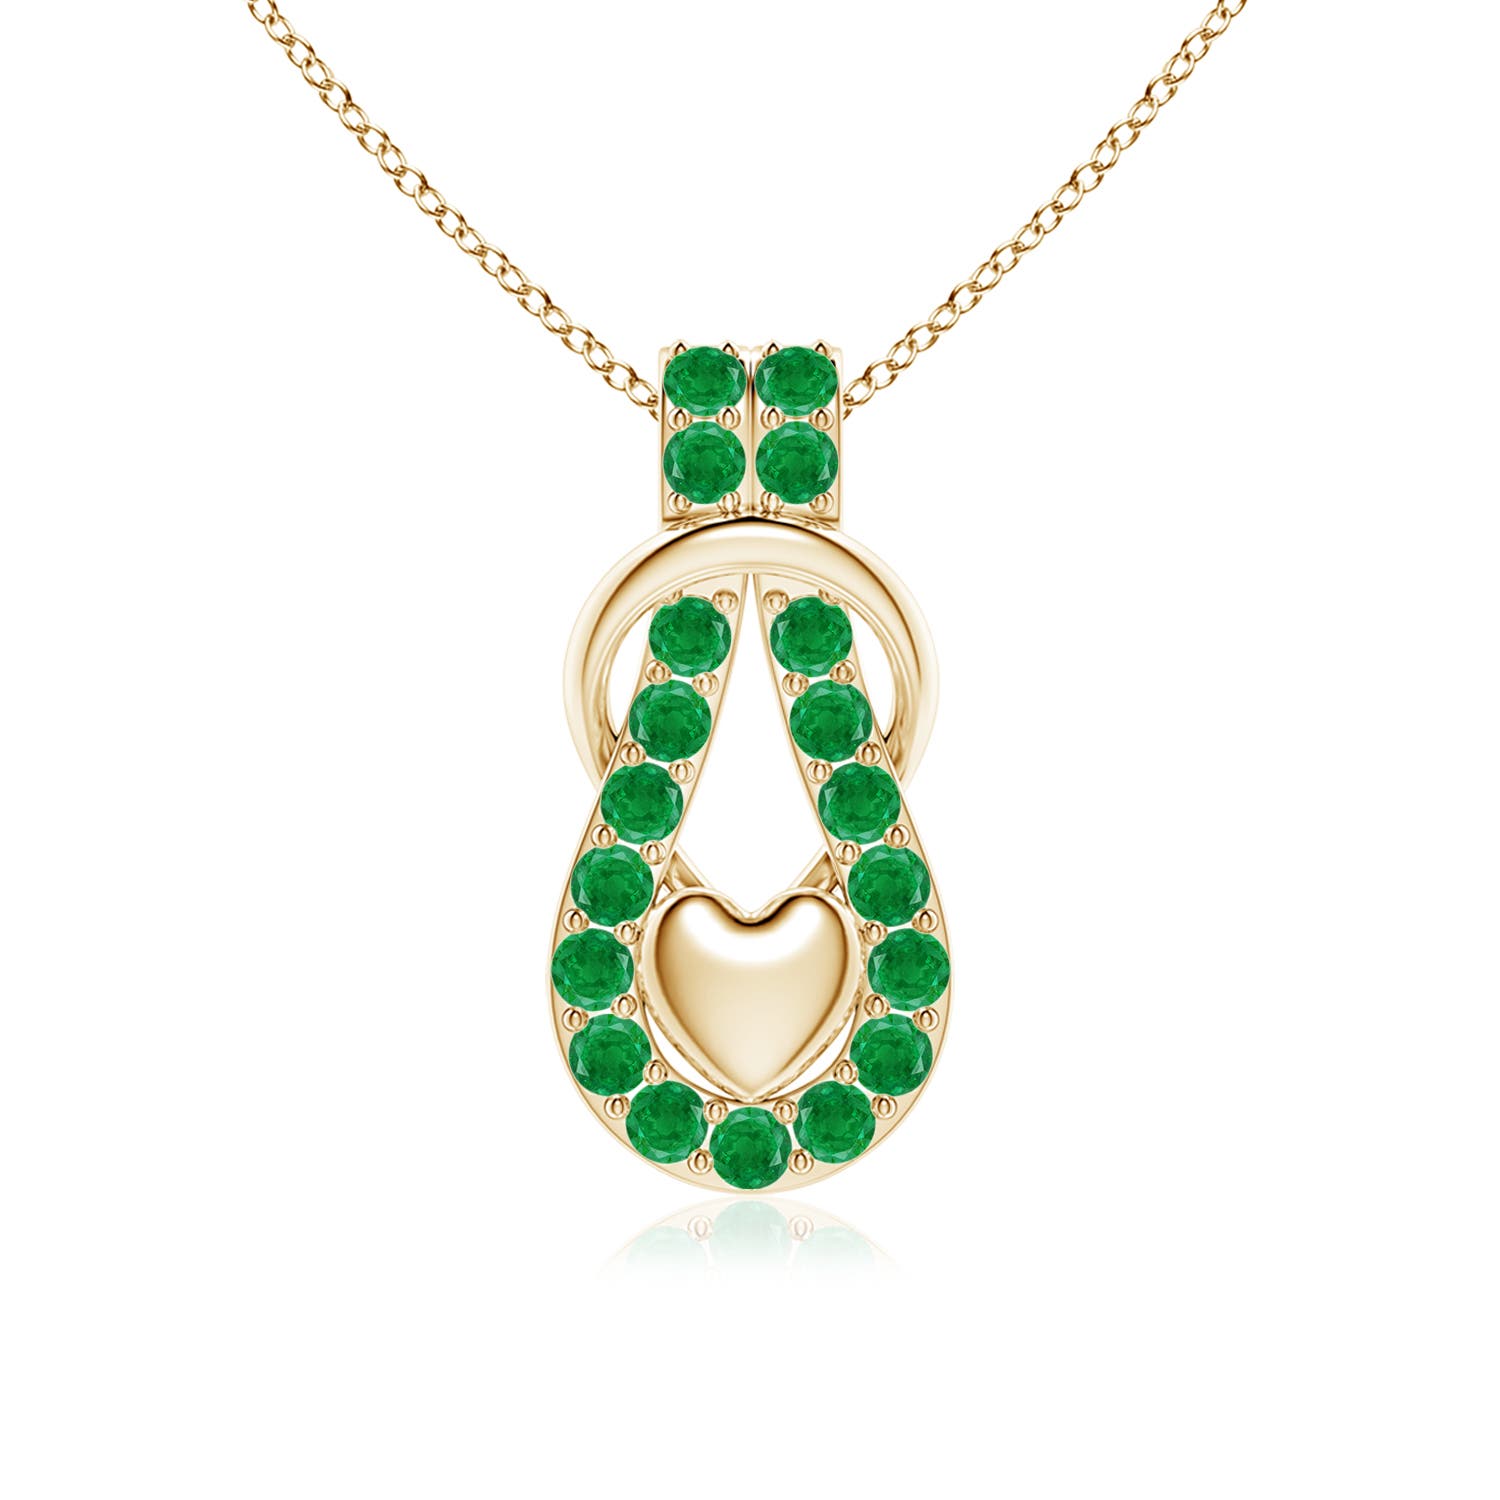 AA - Emerald / 1.2 CT / 18 KT Yellow Gold